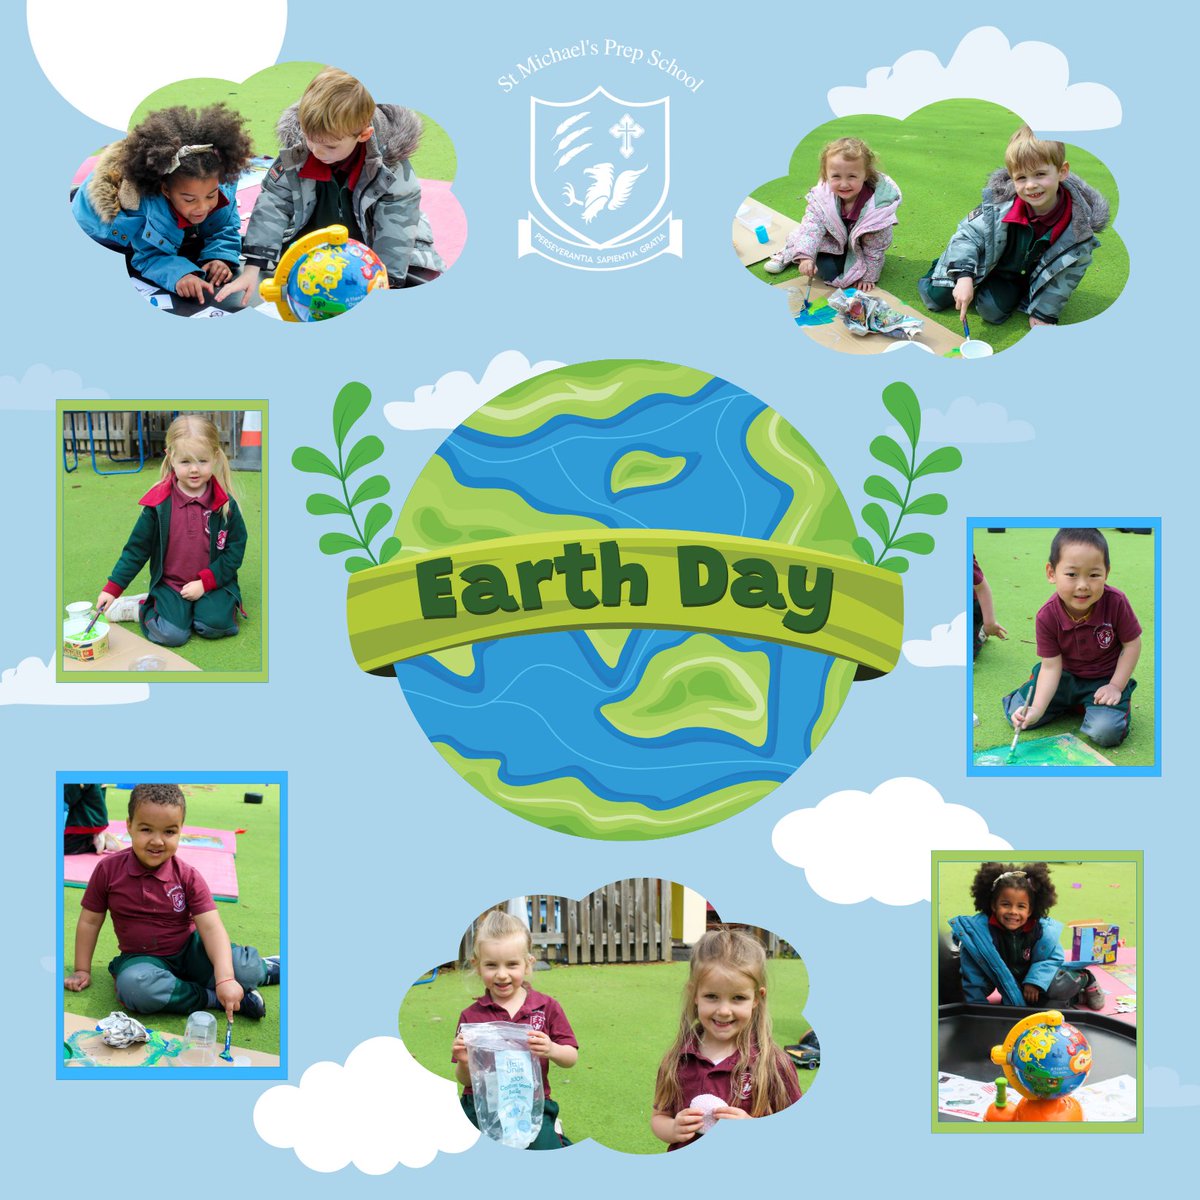 Kindergarten celebrate Earth Day 🌍 Kindergarten have spent today learning all about the Earth, crafting models of the World from cotton balls, using paint to make World artwork and discovering ways they can help their families be kinder to our planet. @WWF #earthday